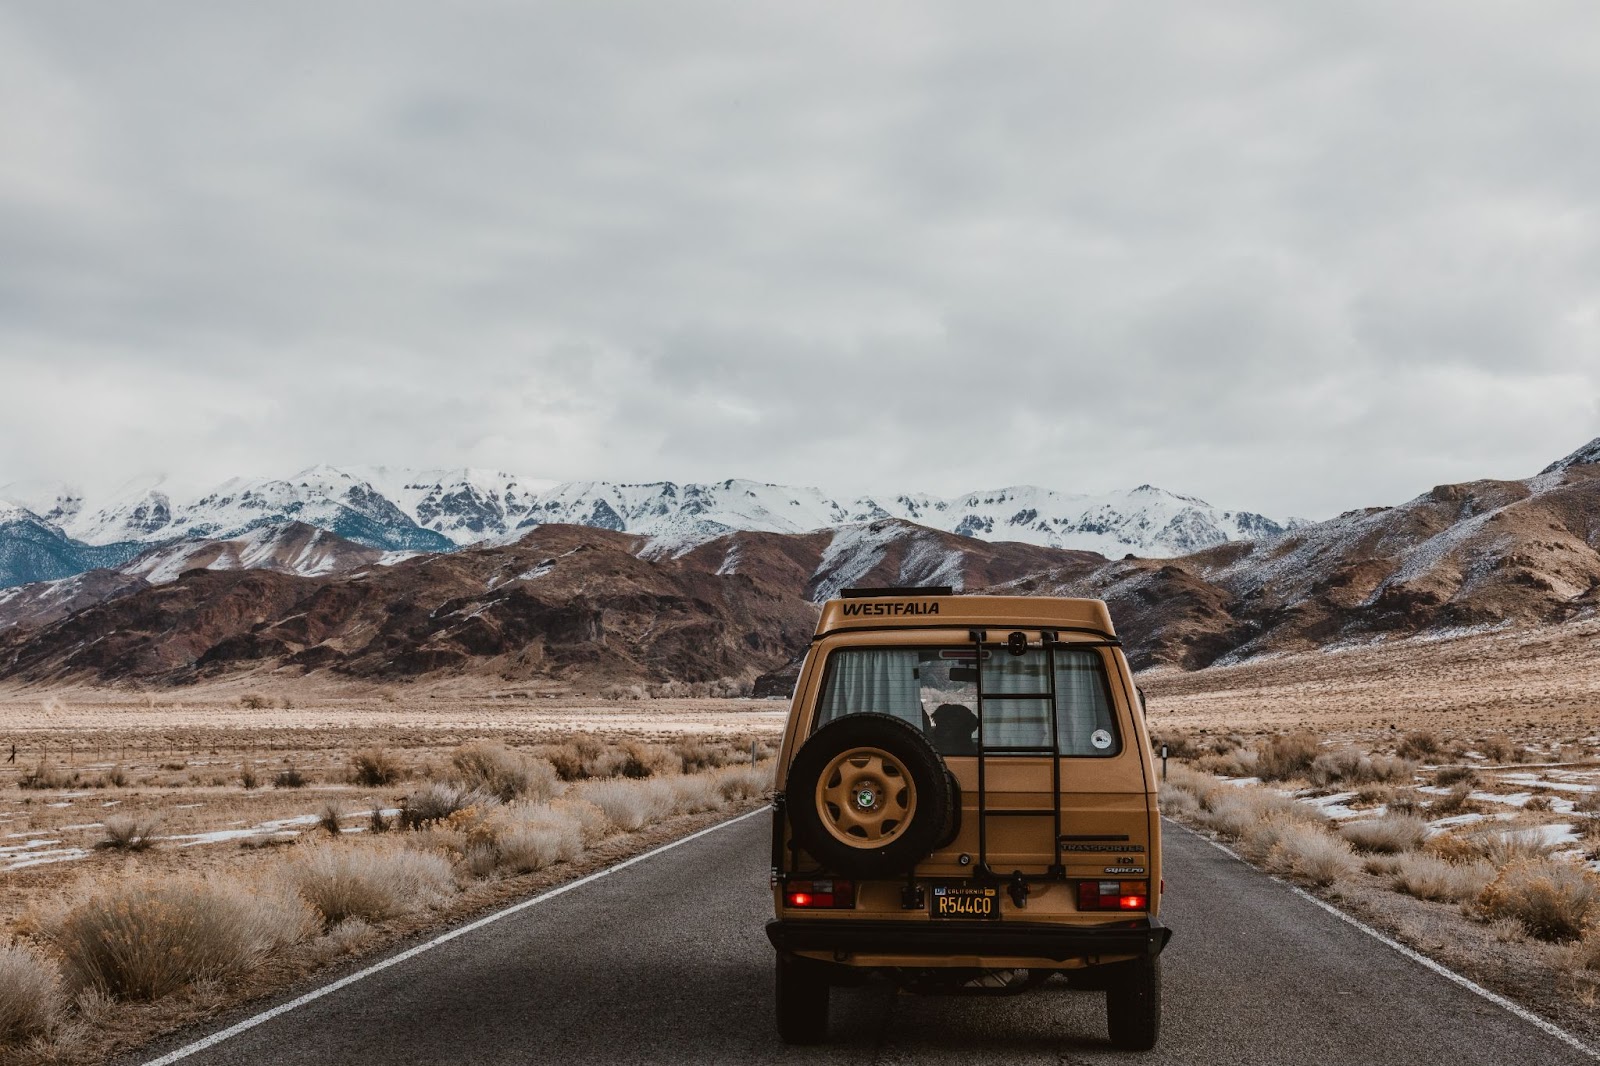 One thing to bear in mind is that, depending on the length and type of road trip, your vehicle might go through a lot of punishment. This is another reason to make sure that you use a reliable vehicle, but you should also consider how this will affect your car later down the road.